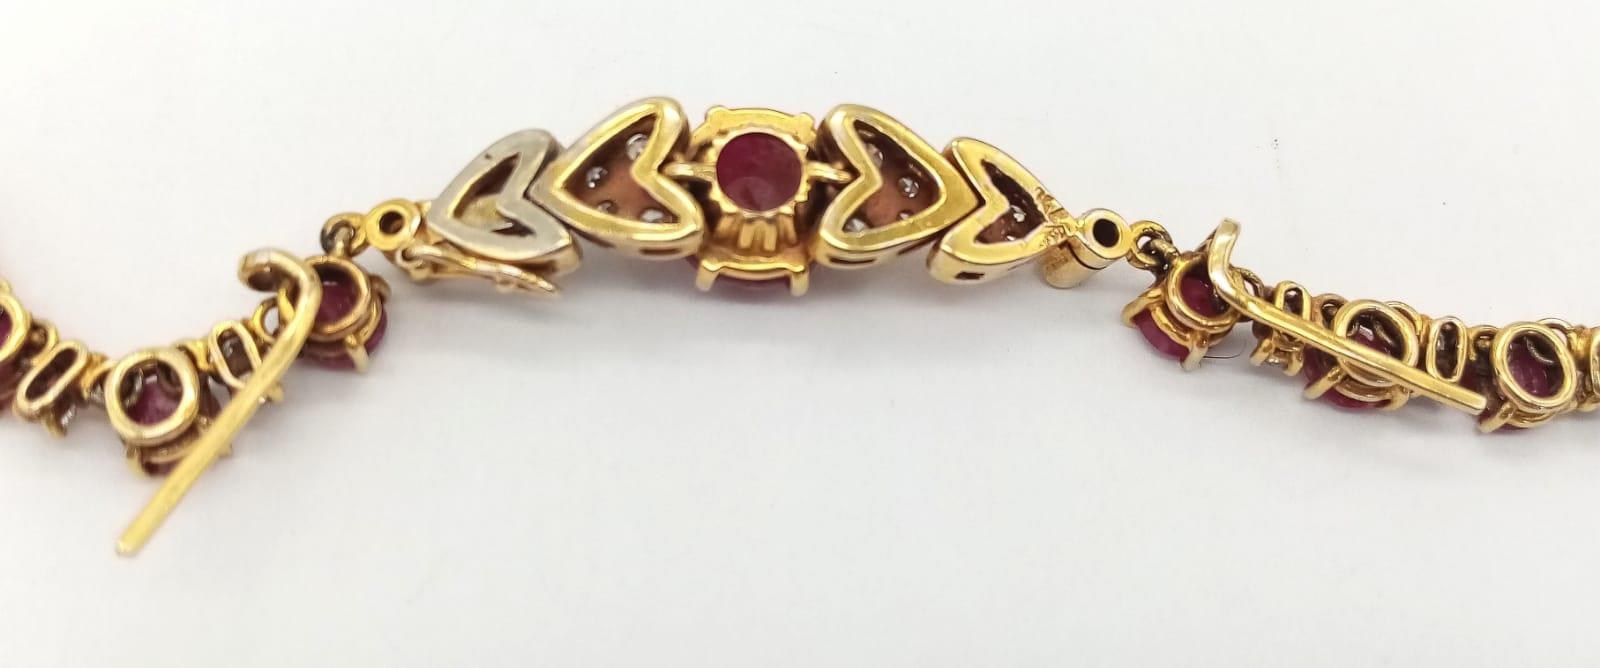 A vintage, 9 K yellow gold necklace loaded with oval cut natural rubies and round cut diamonds. - Image 5 of 10